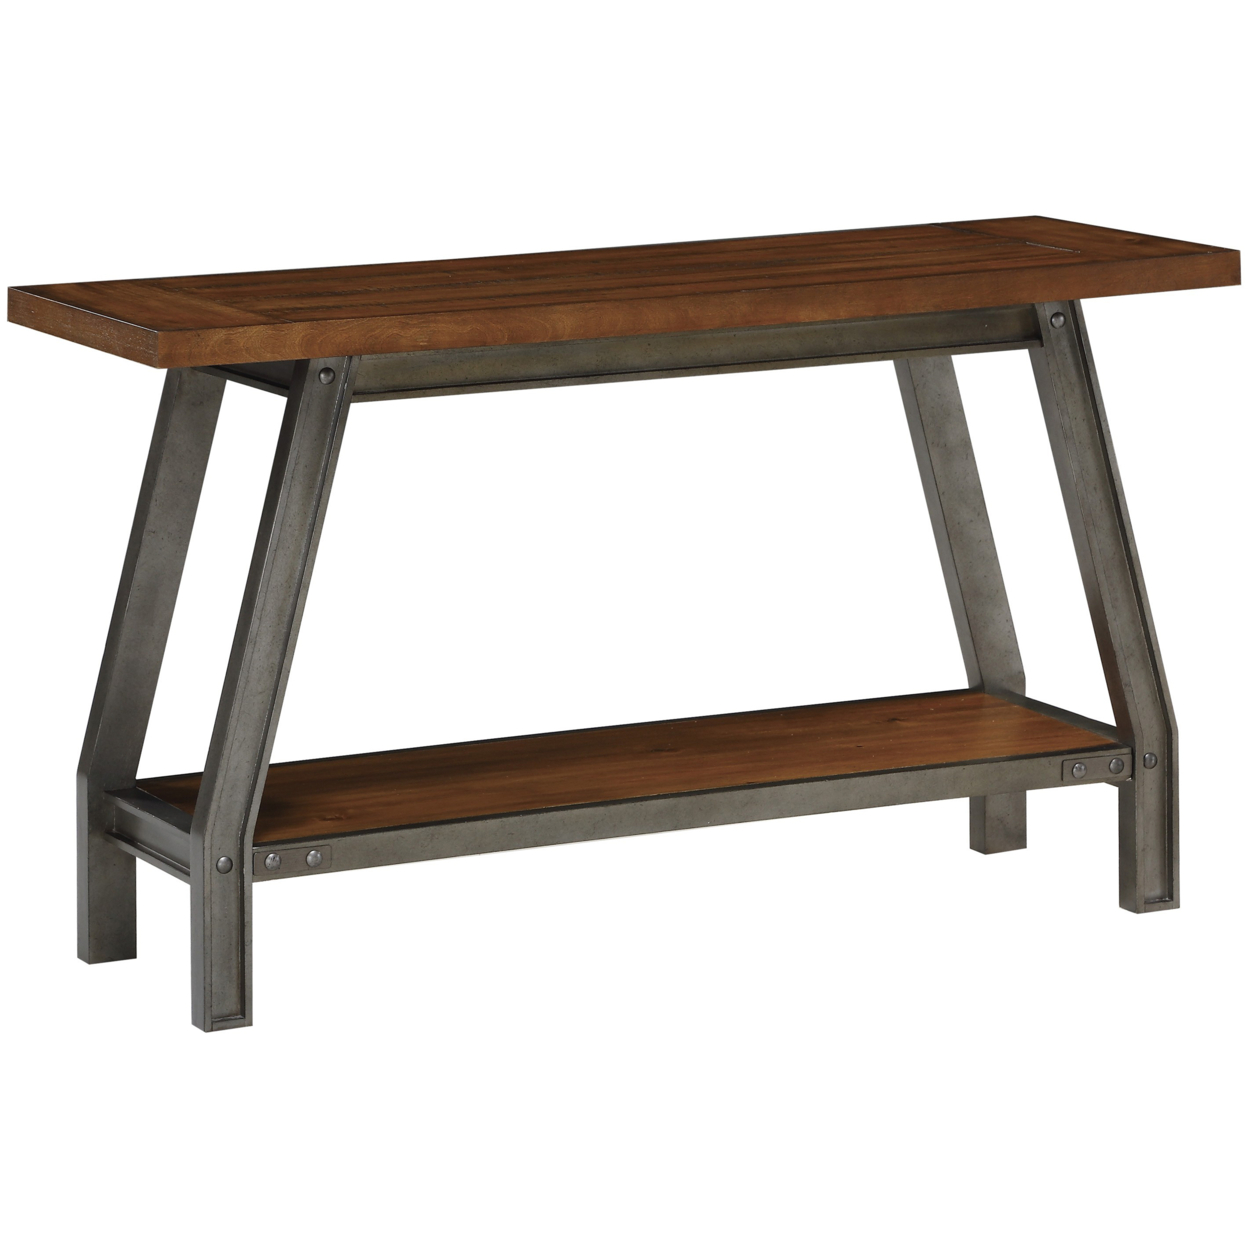 Wooden Top Sofa Table With Open Shelf And Rivet Accents, Brown And Gray- Saltoro Sherpi